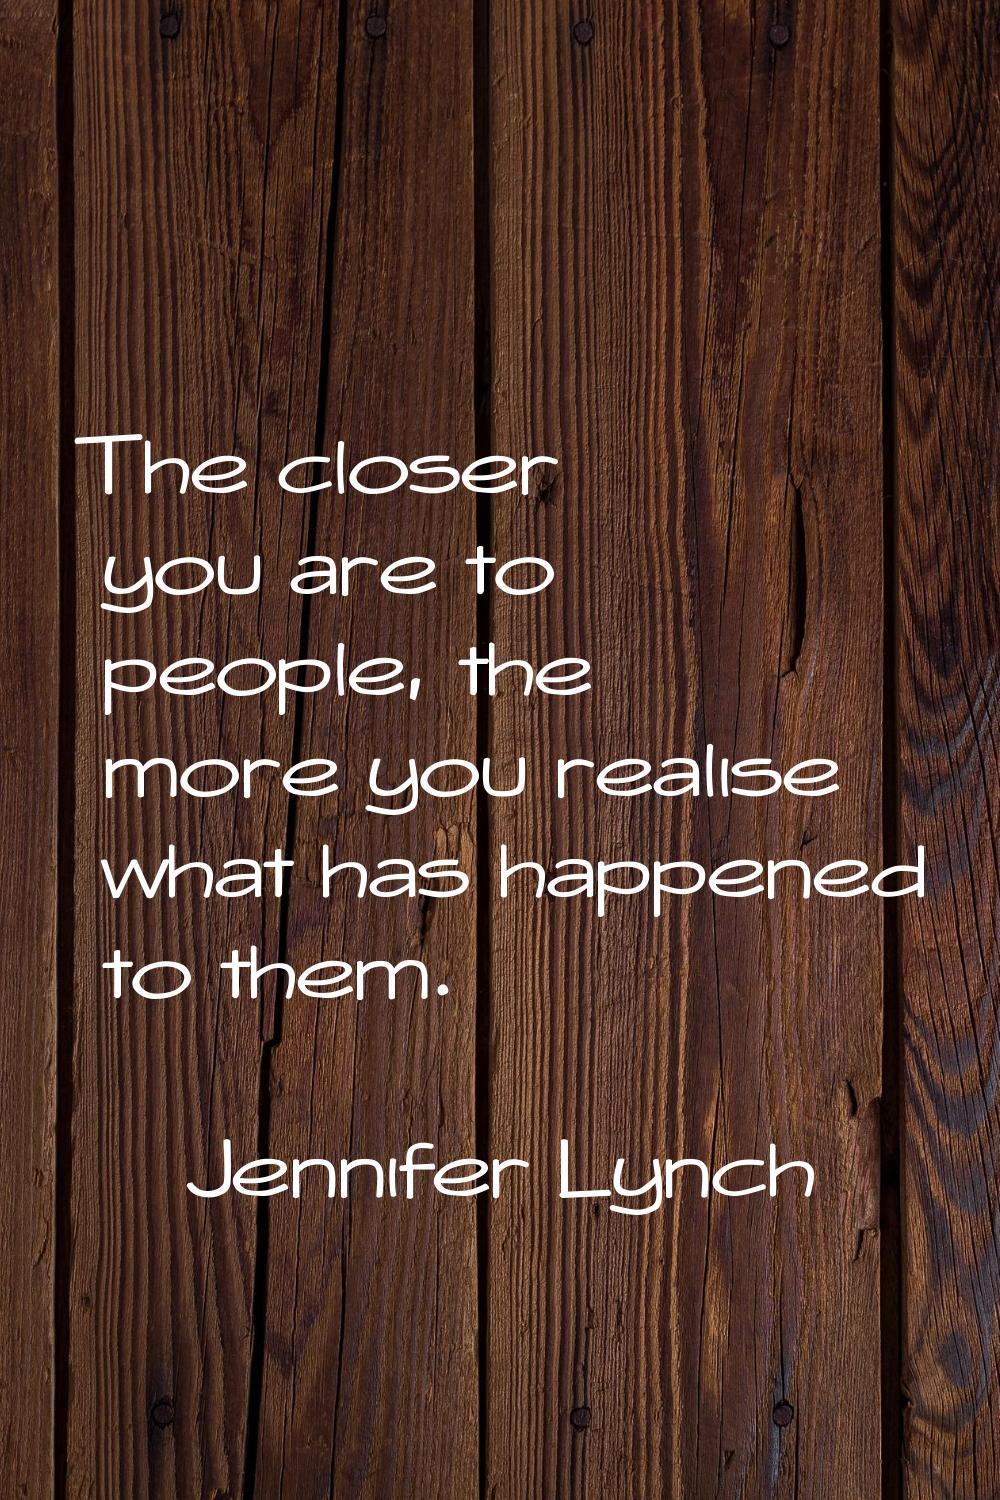 The closer you are to people, the more you realise what has happened to them.